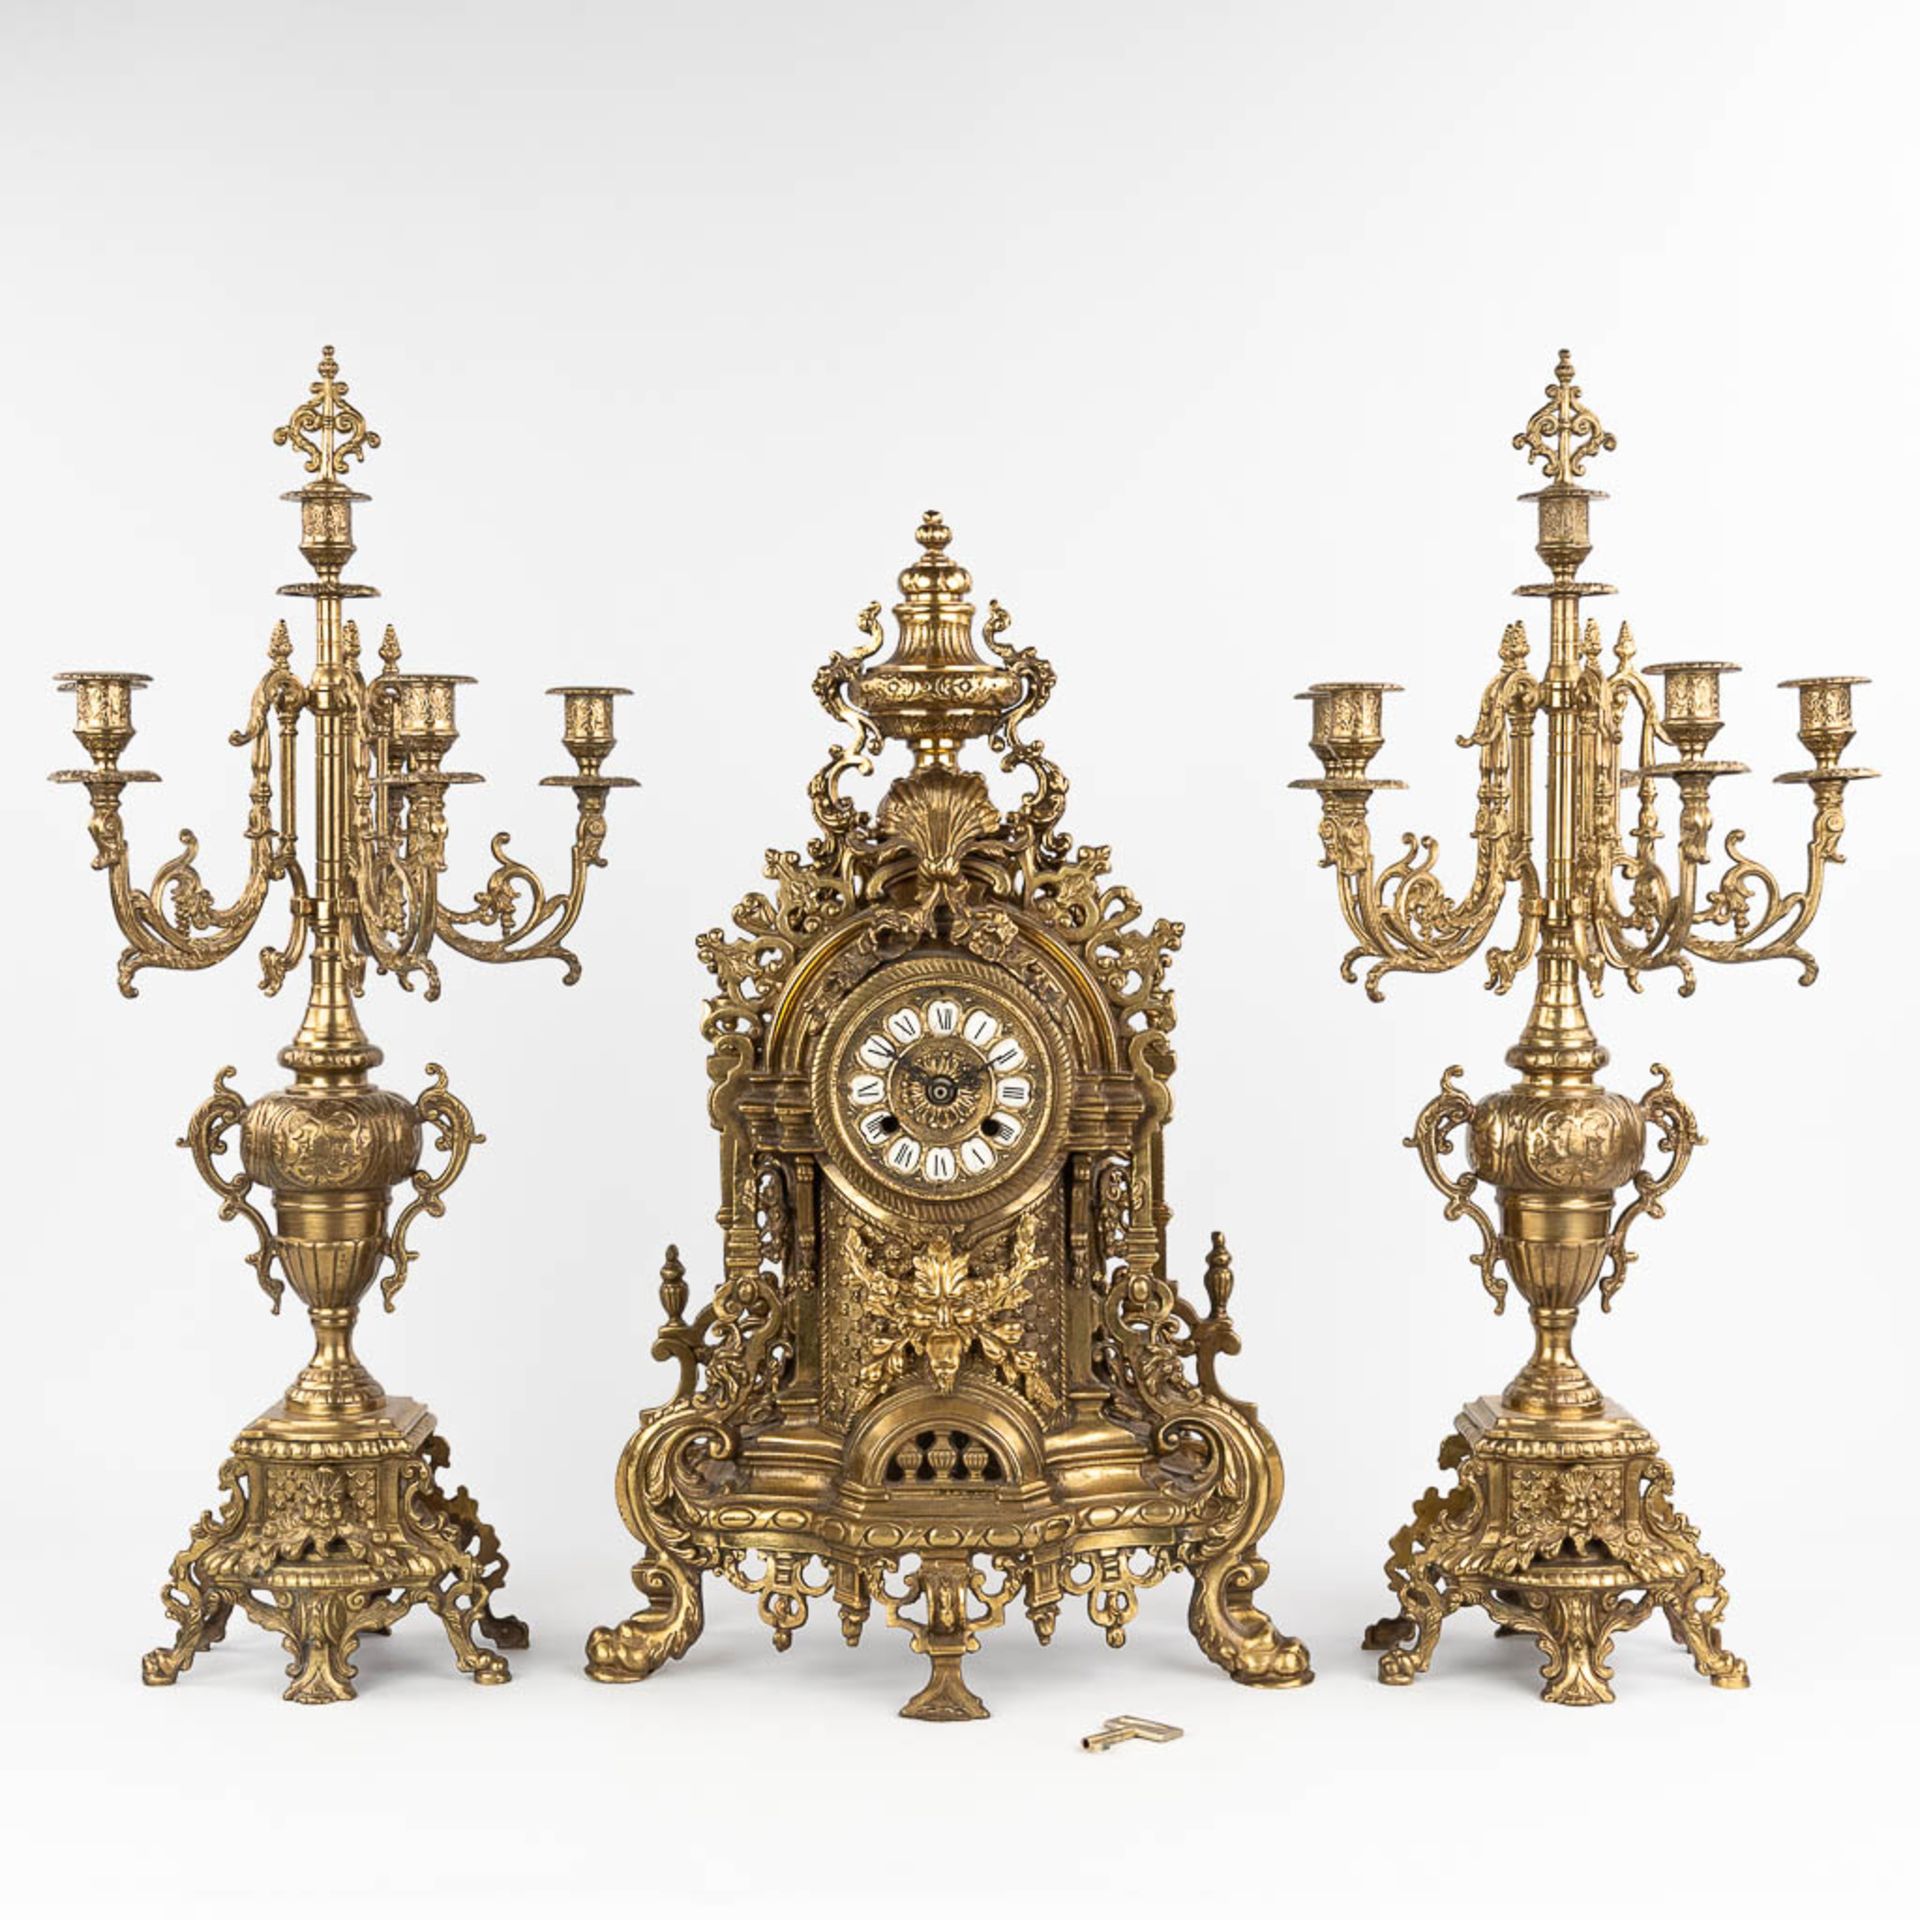 A three-piece mantle garniture consisting of a clock with candelabra, made of bronze. circa 1970. (W